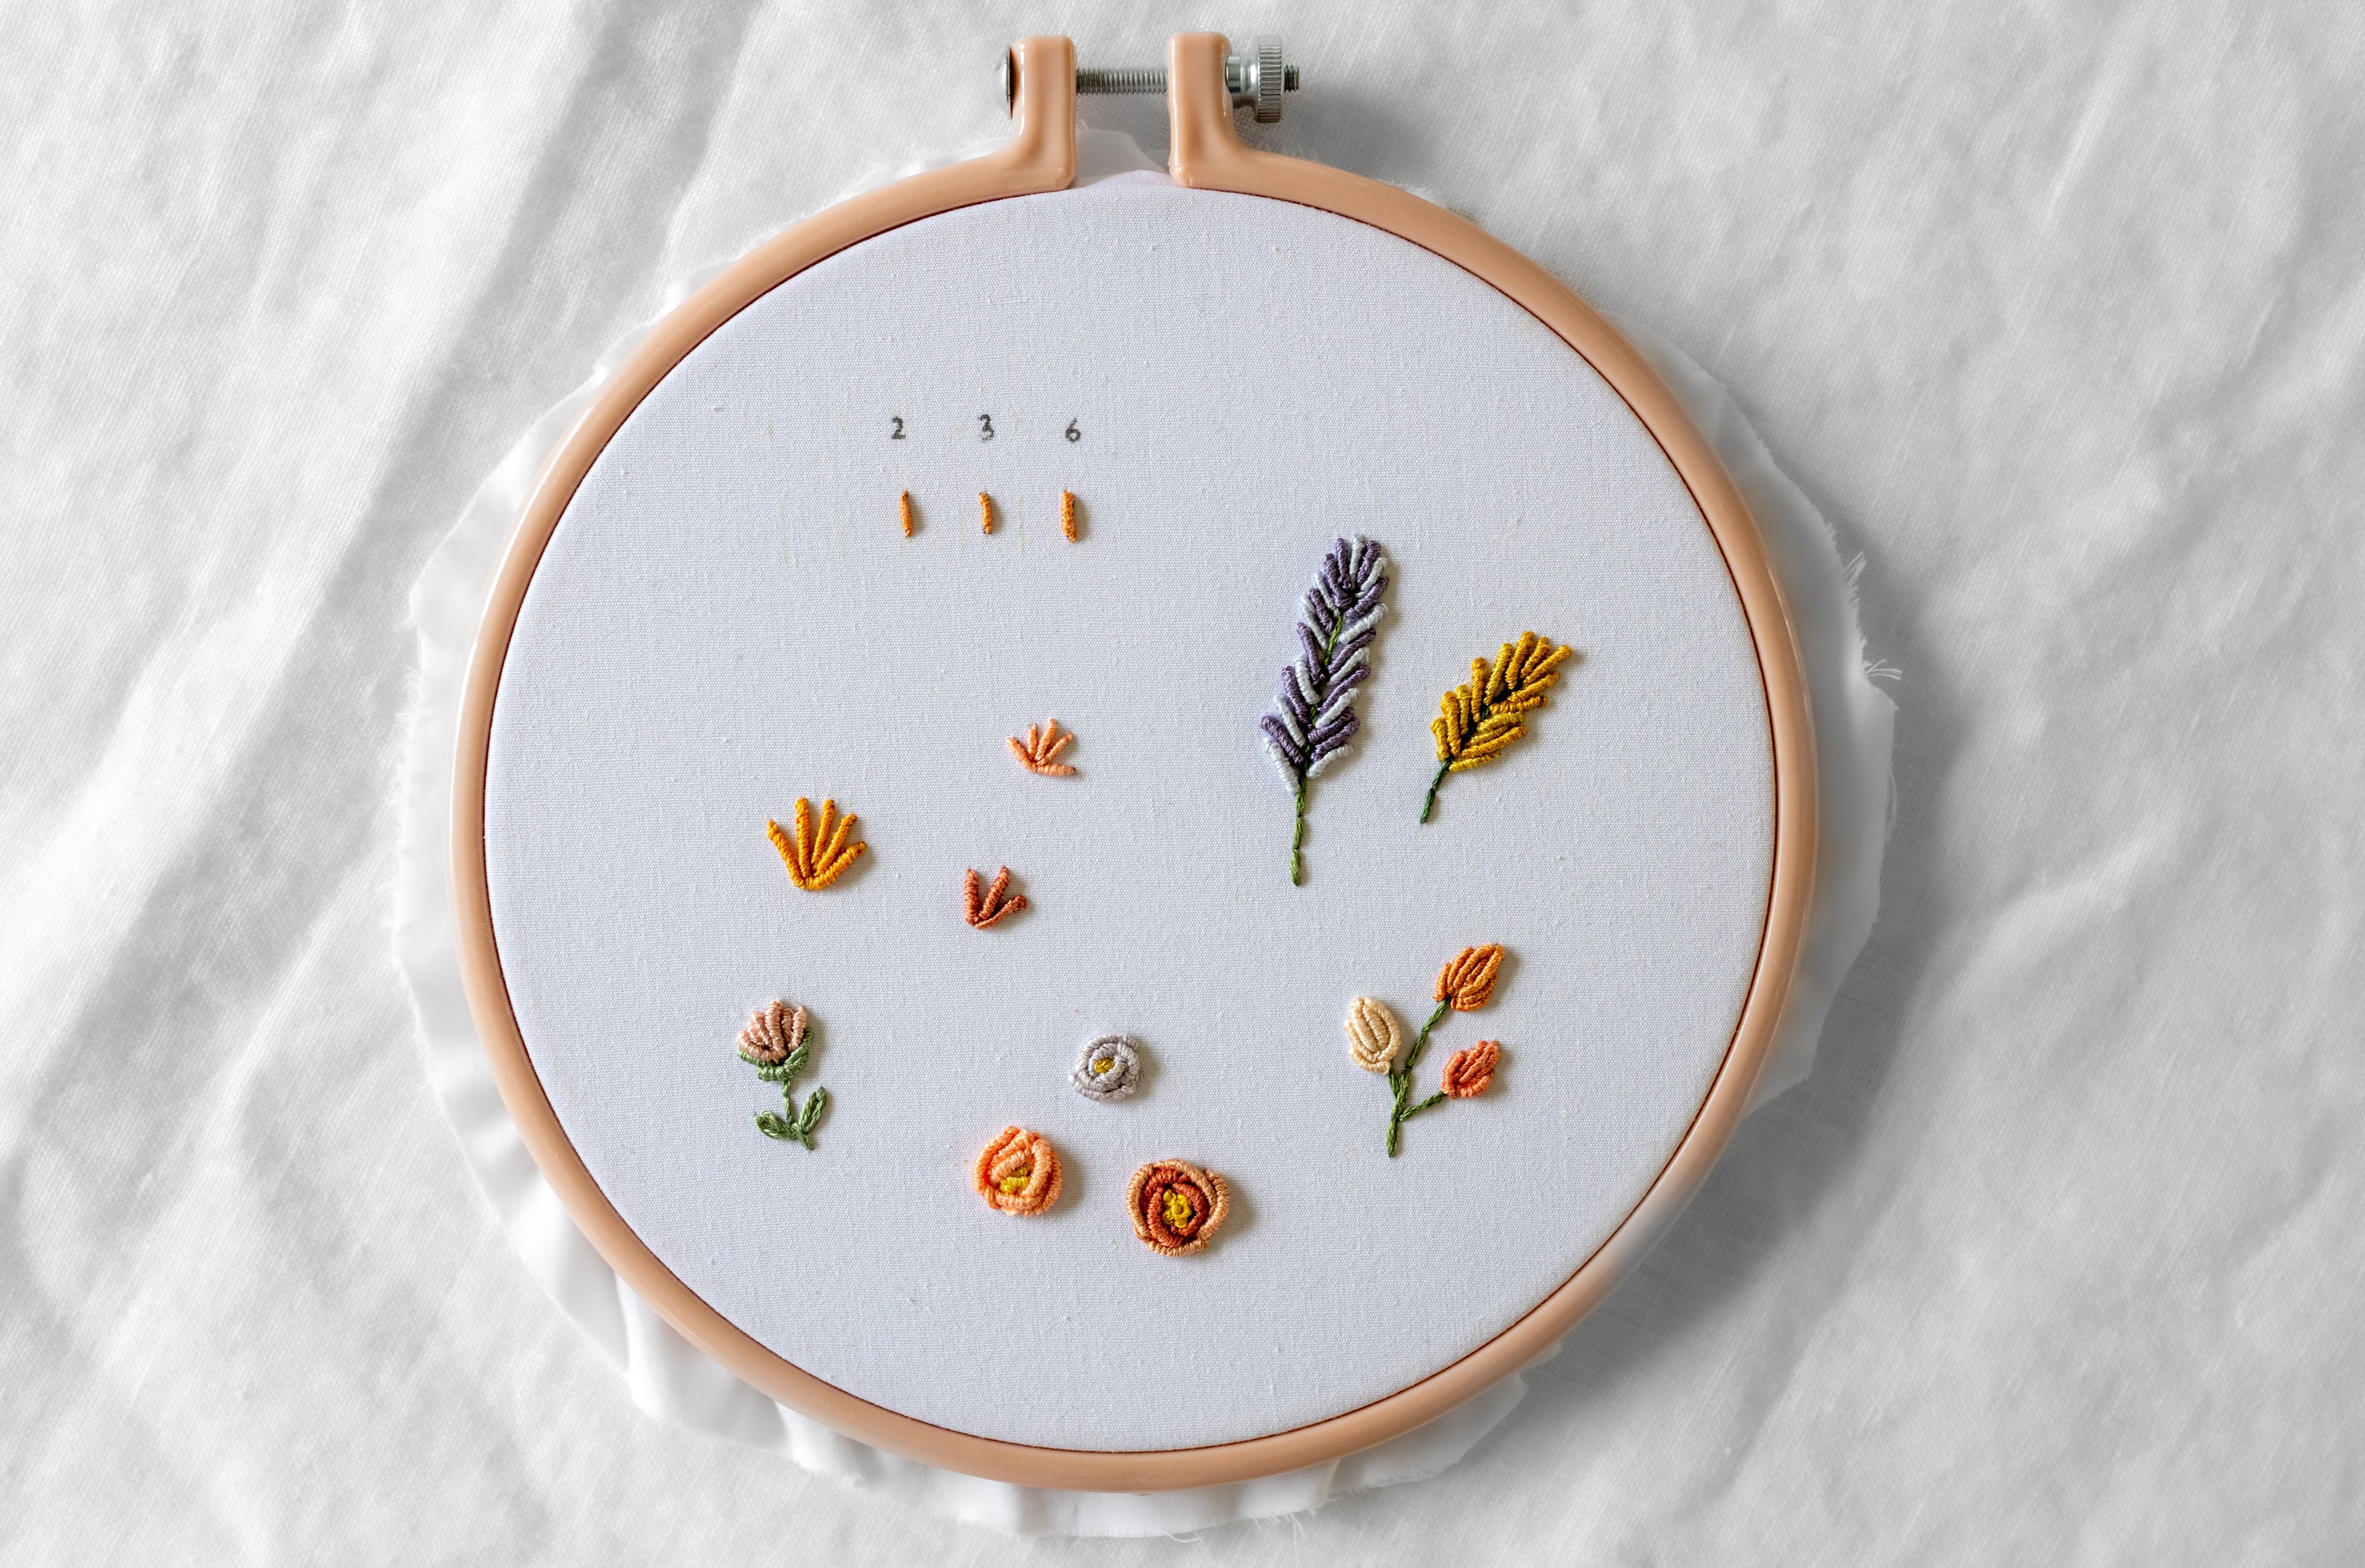 Various flowers made with Bullion Knots are stitched on an embroidery hoop.